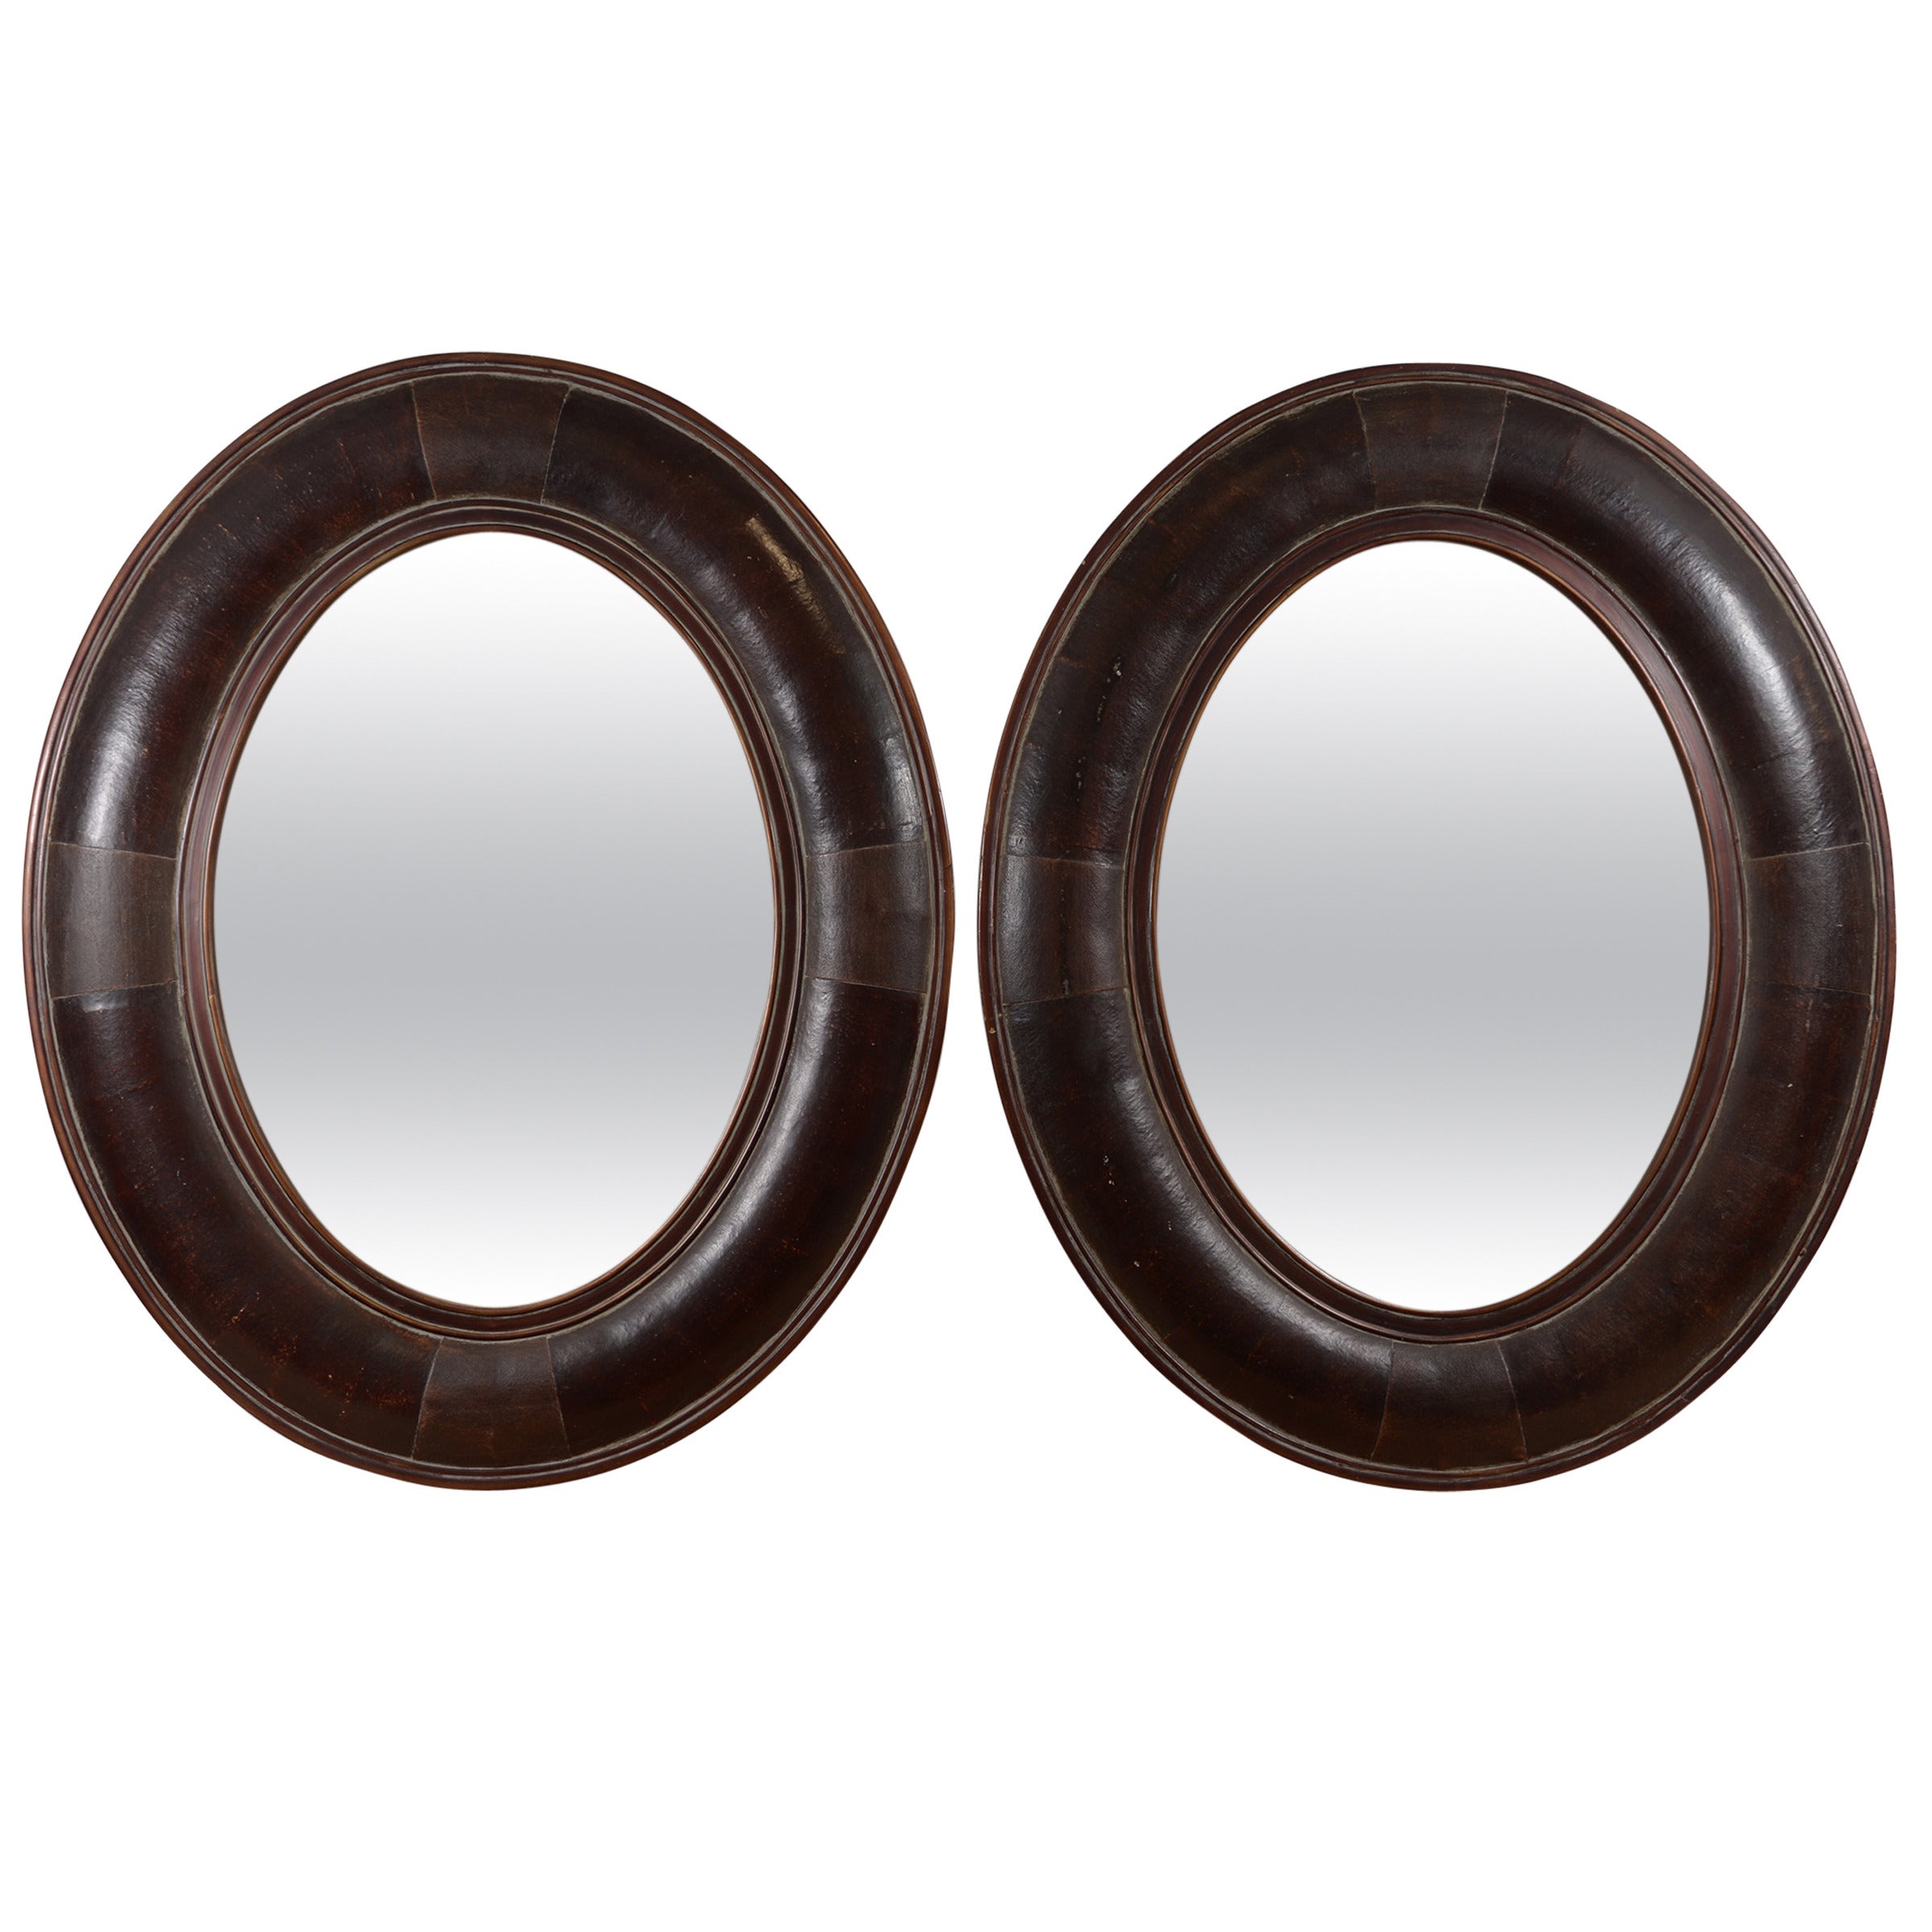 Pair of French Leather Mirrors